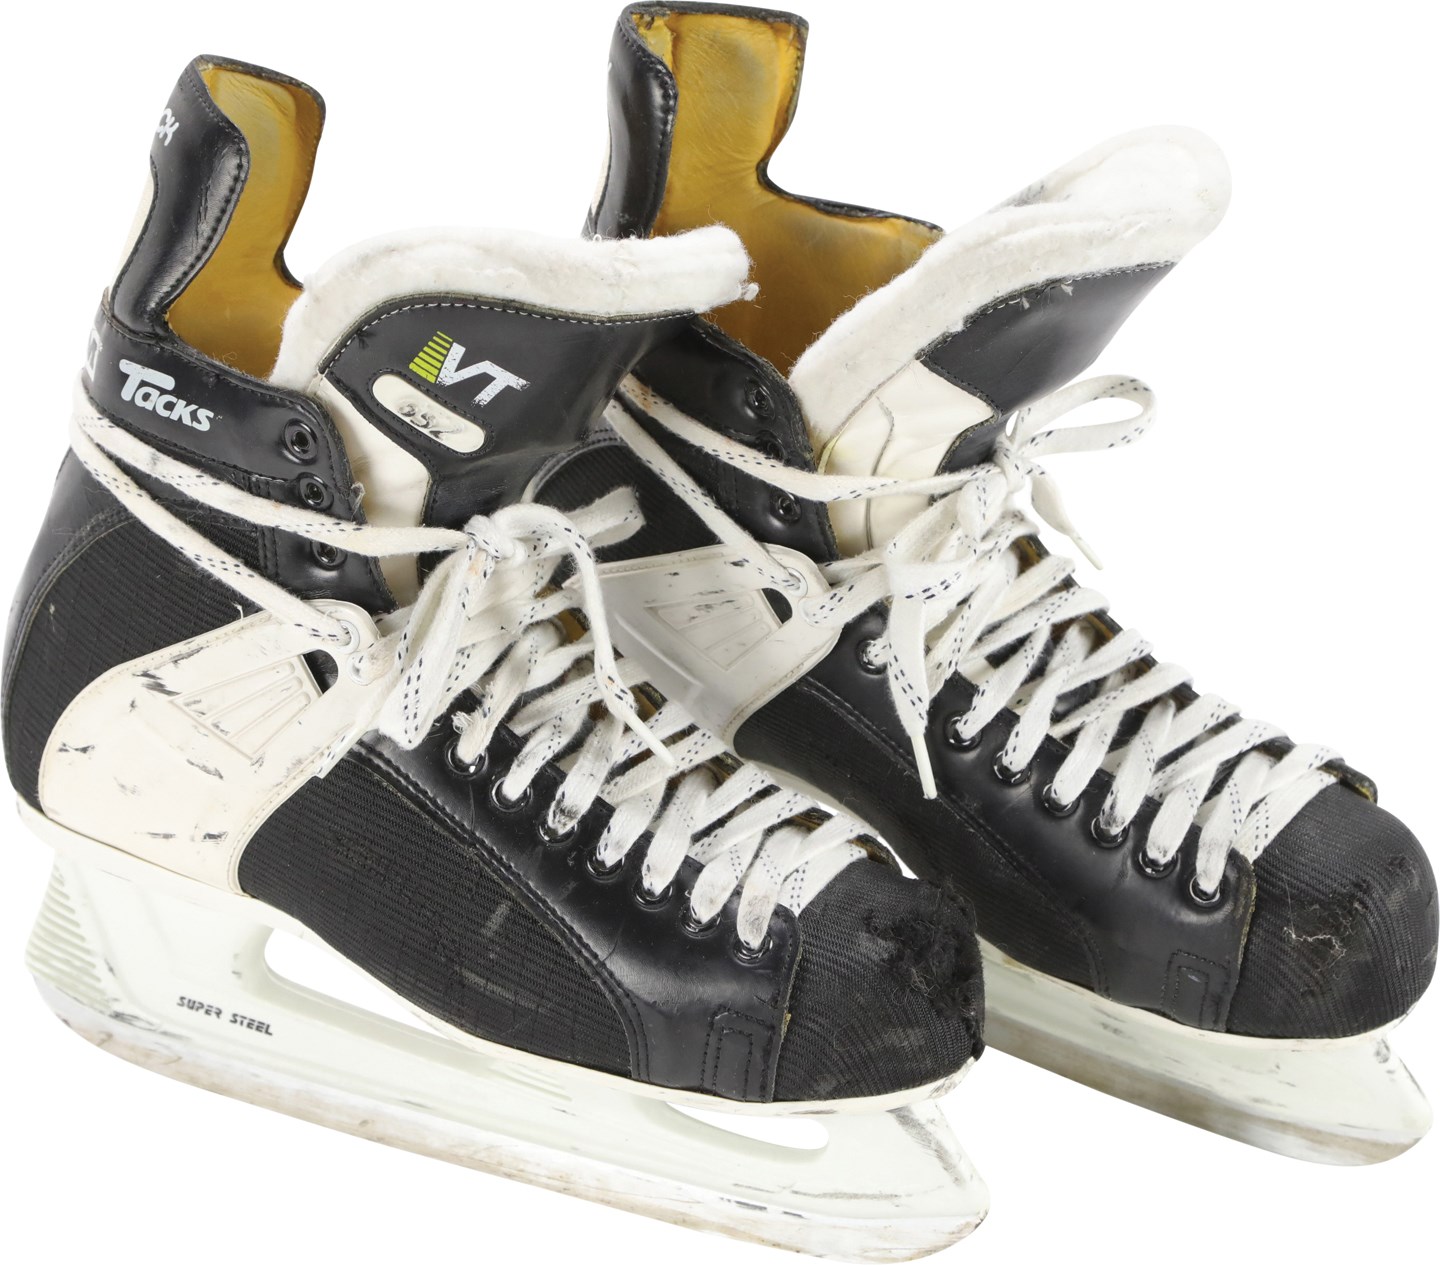 - 1995-96 Mario Lemieux Game Used Skates - Hart and Art Ross Trophy Year